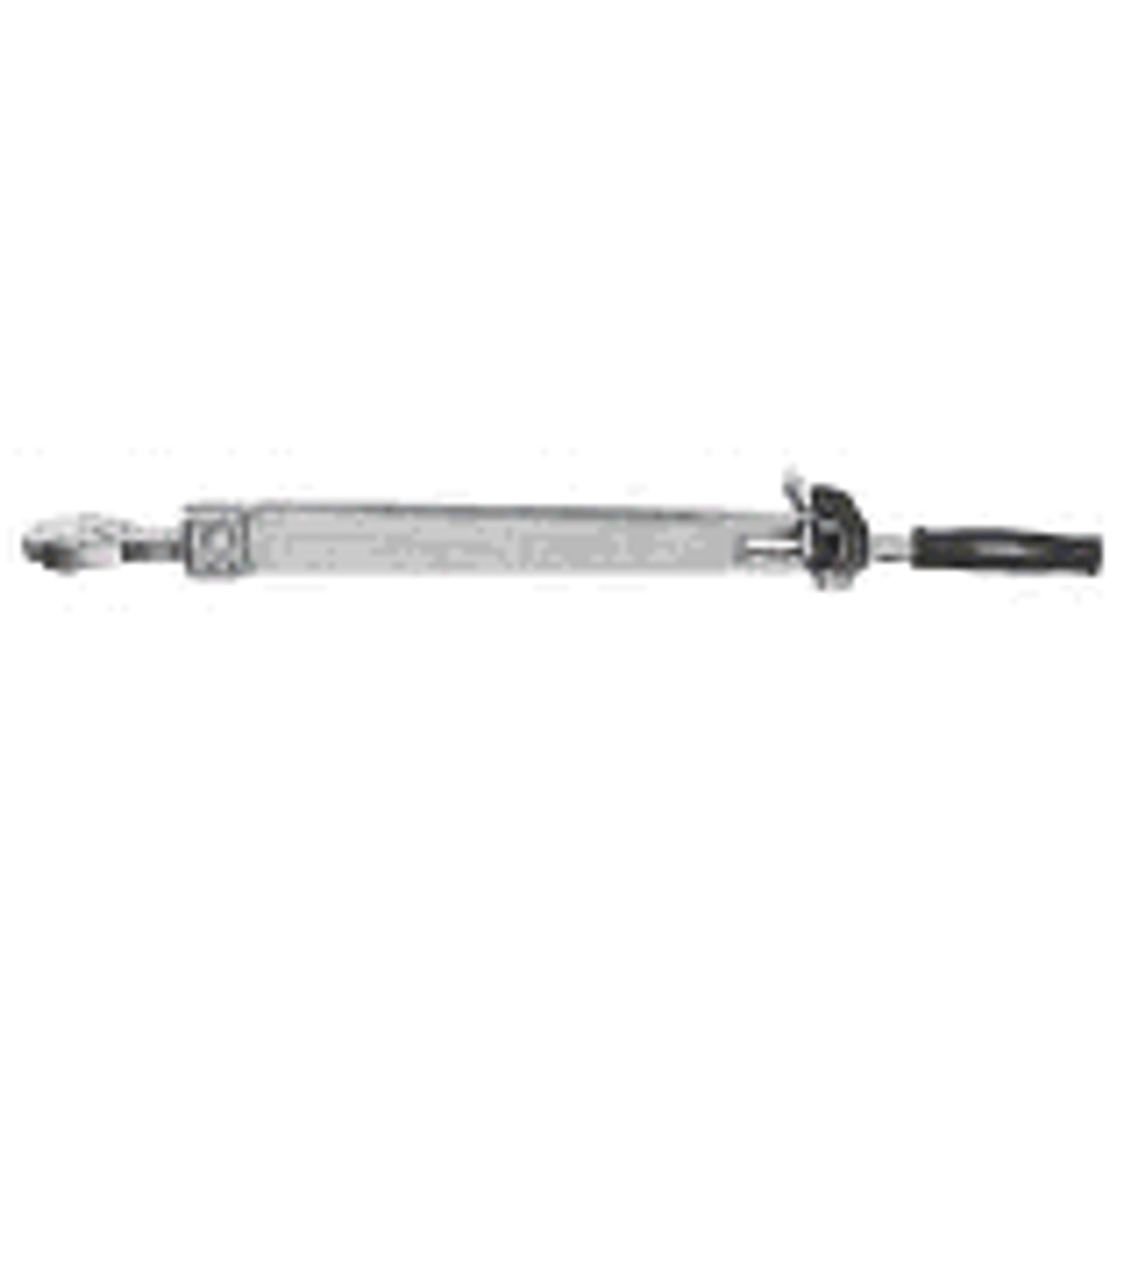 IMPA 611437 WRENCH TORQUE WITH RATCHET 20-120NM 12.7MM